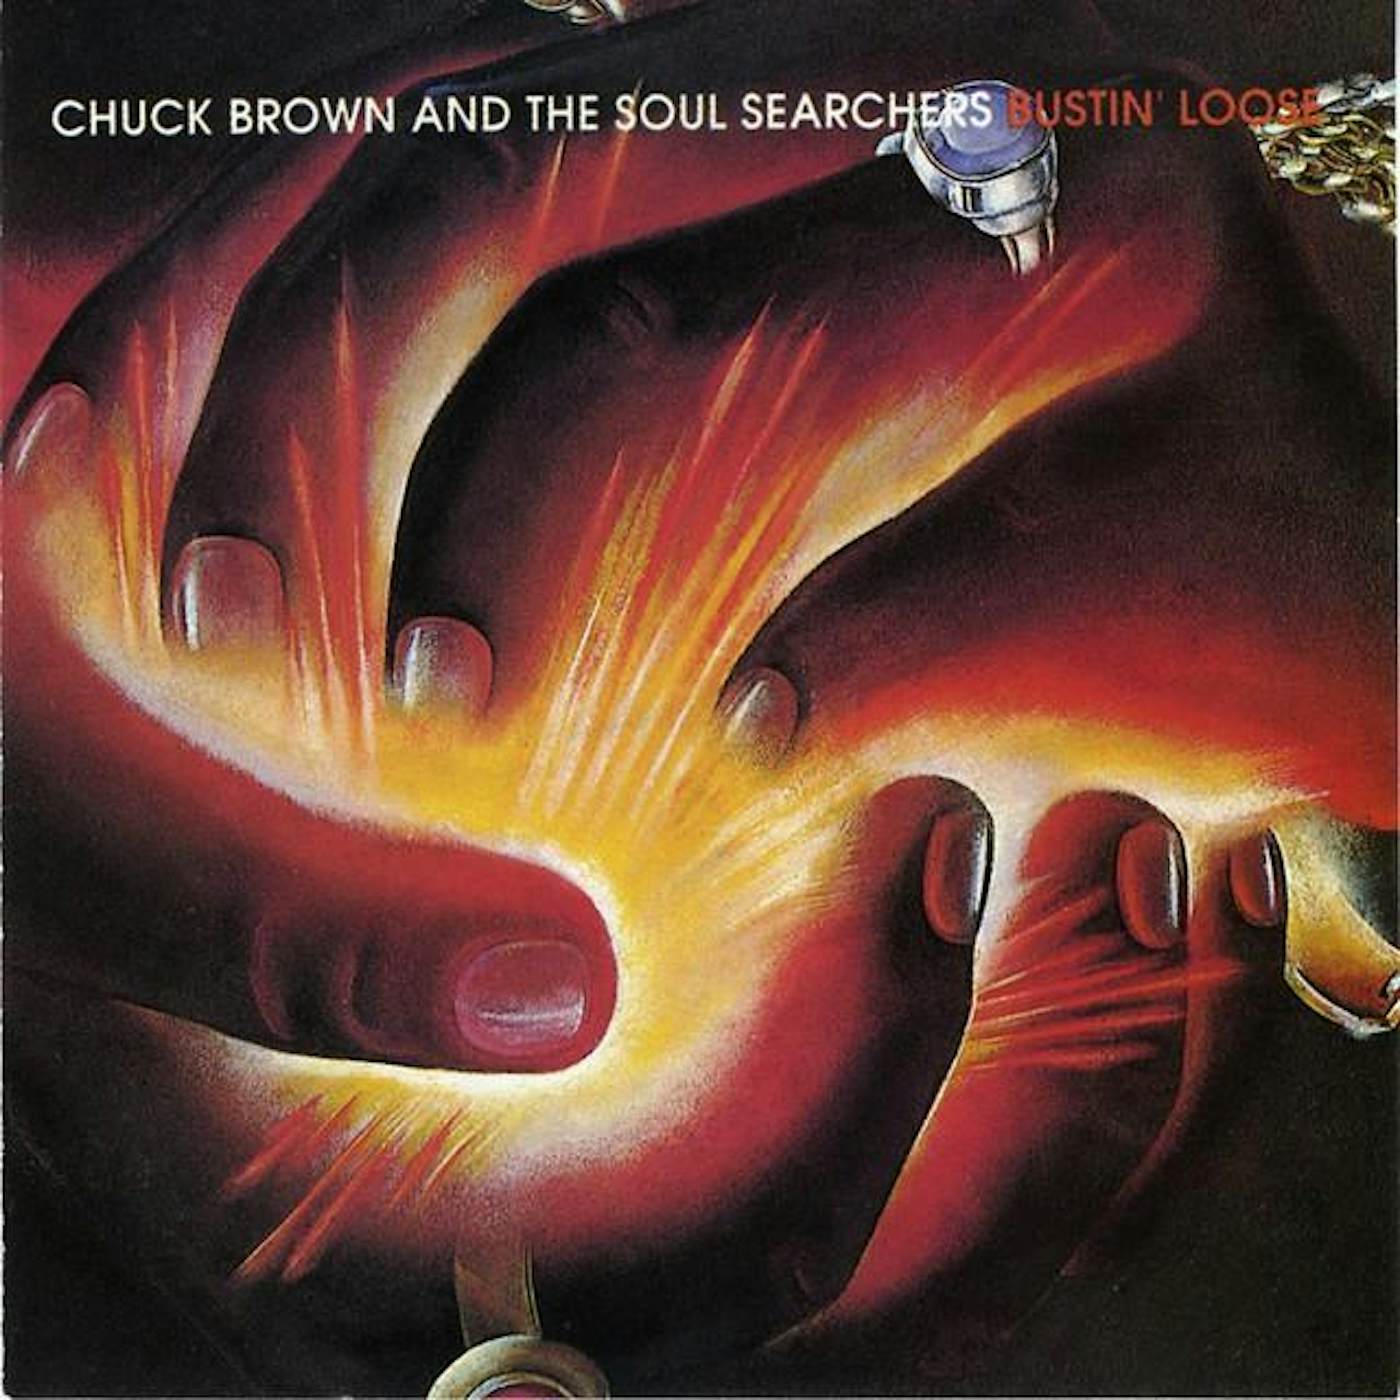 Chuck Brown and the Soul Searchers